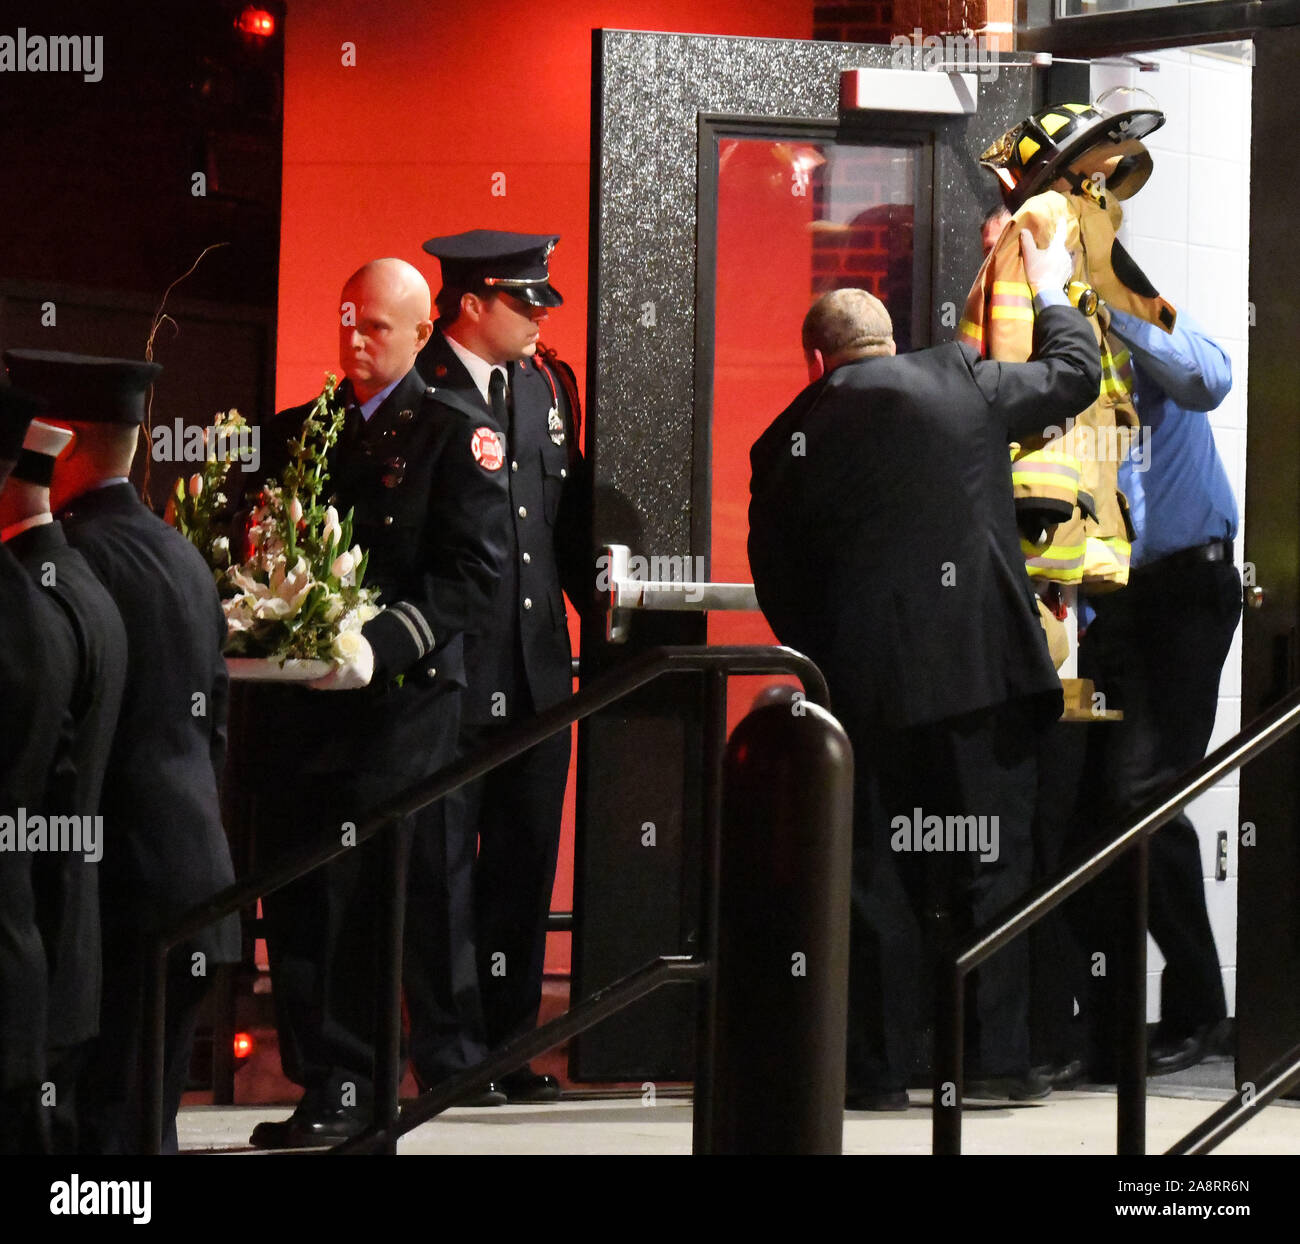 Union Grove, Wisconsin, USA. 10th Nov, 2019. Firefighter Serdynski's turnout gear is carried out after a visitation and a memorial service were held at Union Grove Union High School Sunday November 10, 2019 for Brian Serdynski of the Union Grove - Yorkville (Wisconsin) Fire Department who died November 2. Serdynski, 38, had suffered a heart attack on an emergency call two weeks earlier, but had been cleared to return to duty. He died at home. He is survived by his wife and three young children. Wisconsin Gov. Tony Evers ordered flags to be flown at half staff until his funeral. (Credit Im Stock Photo